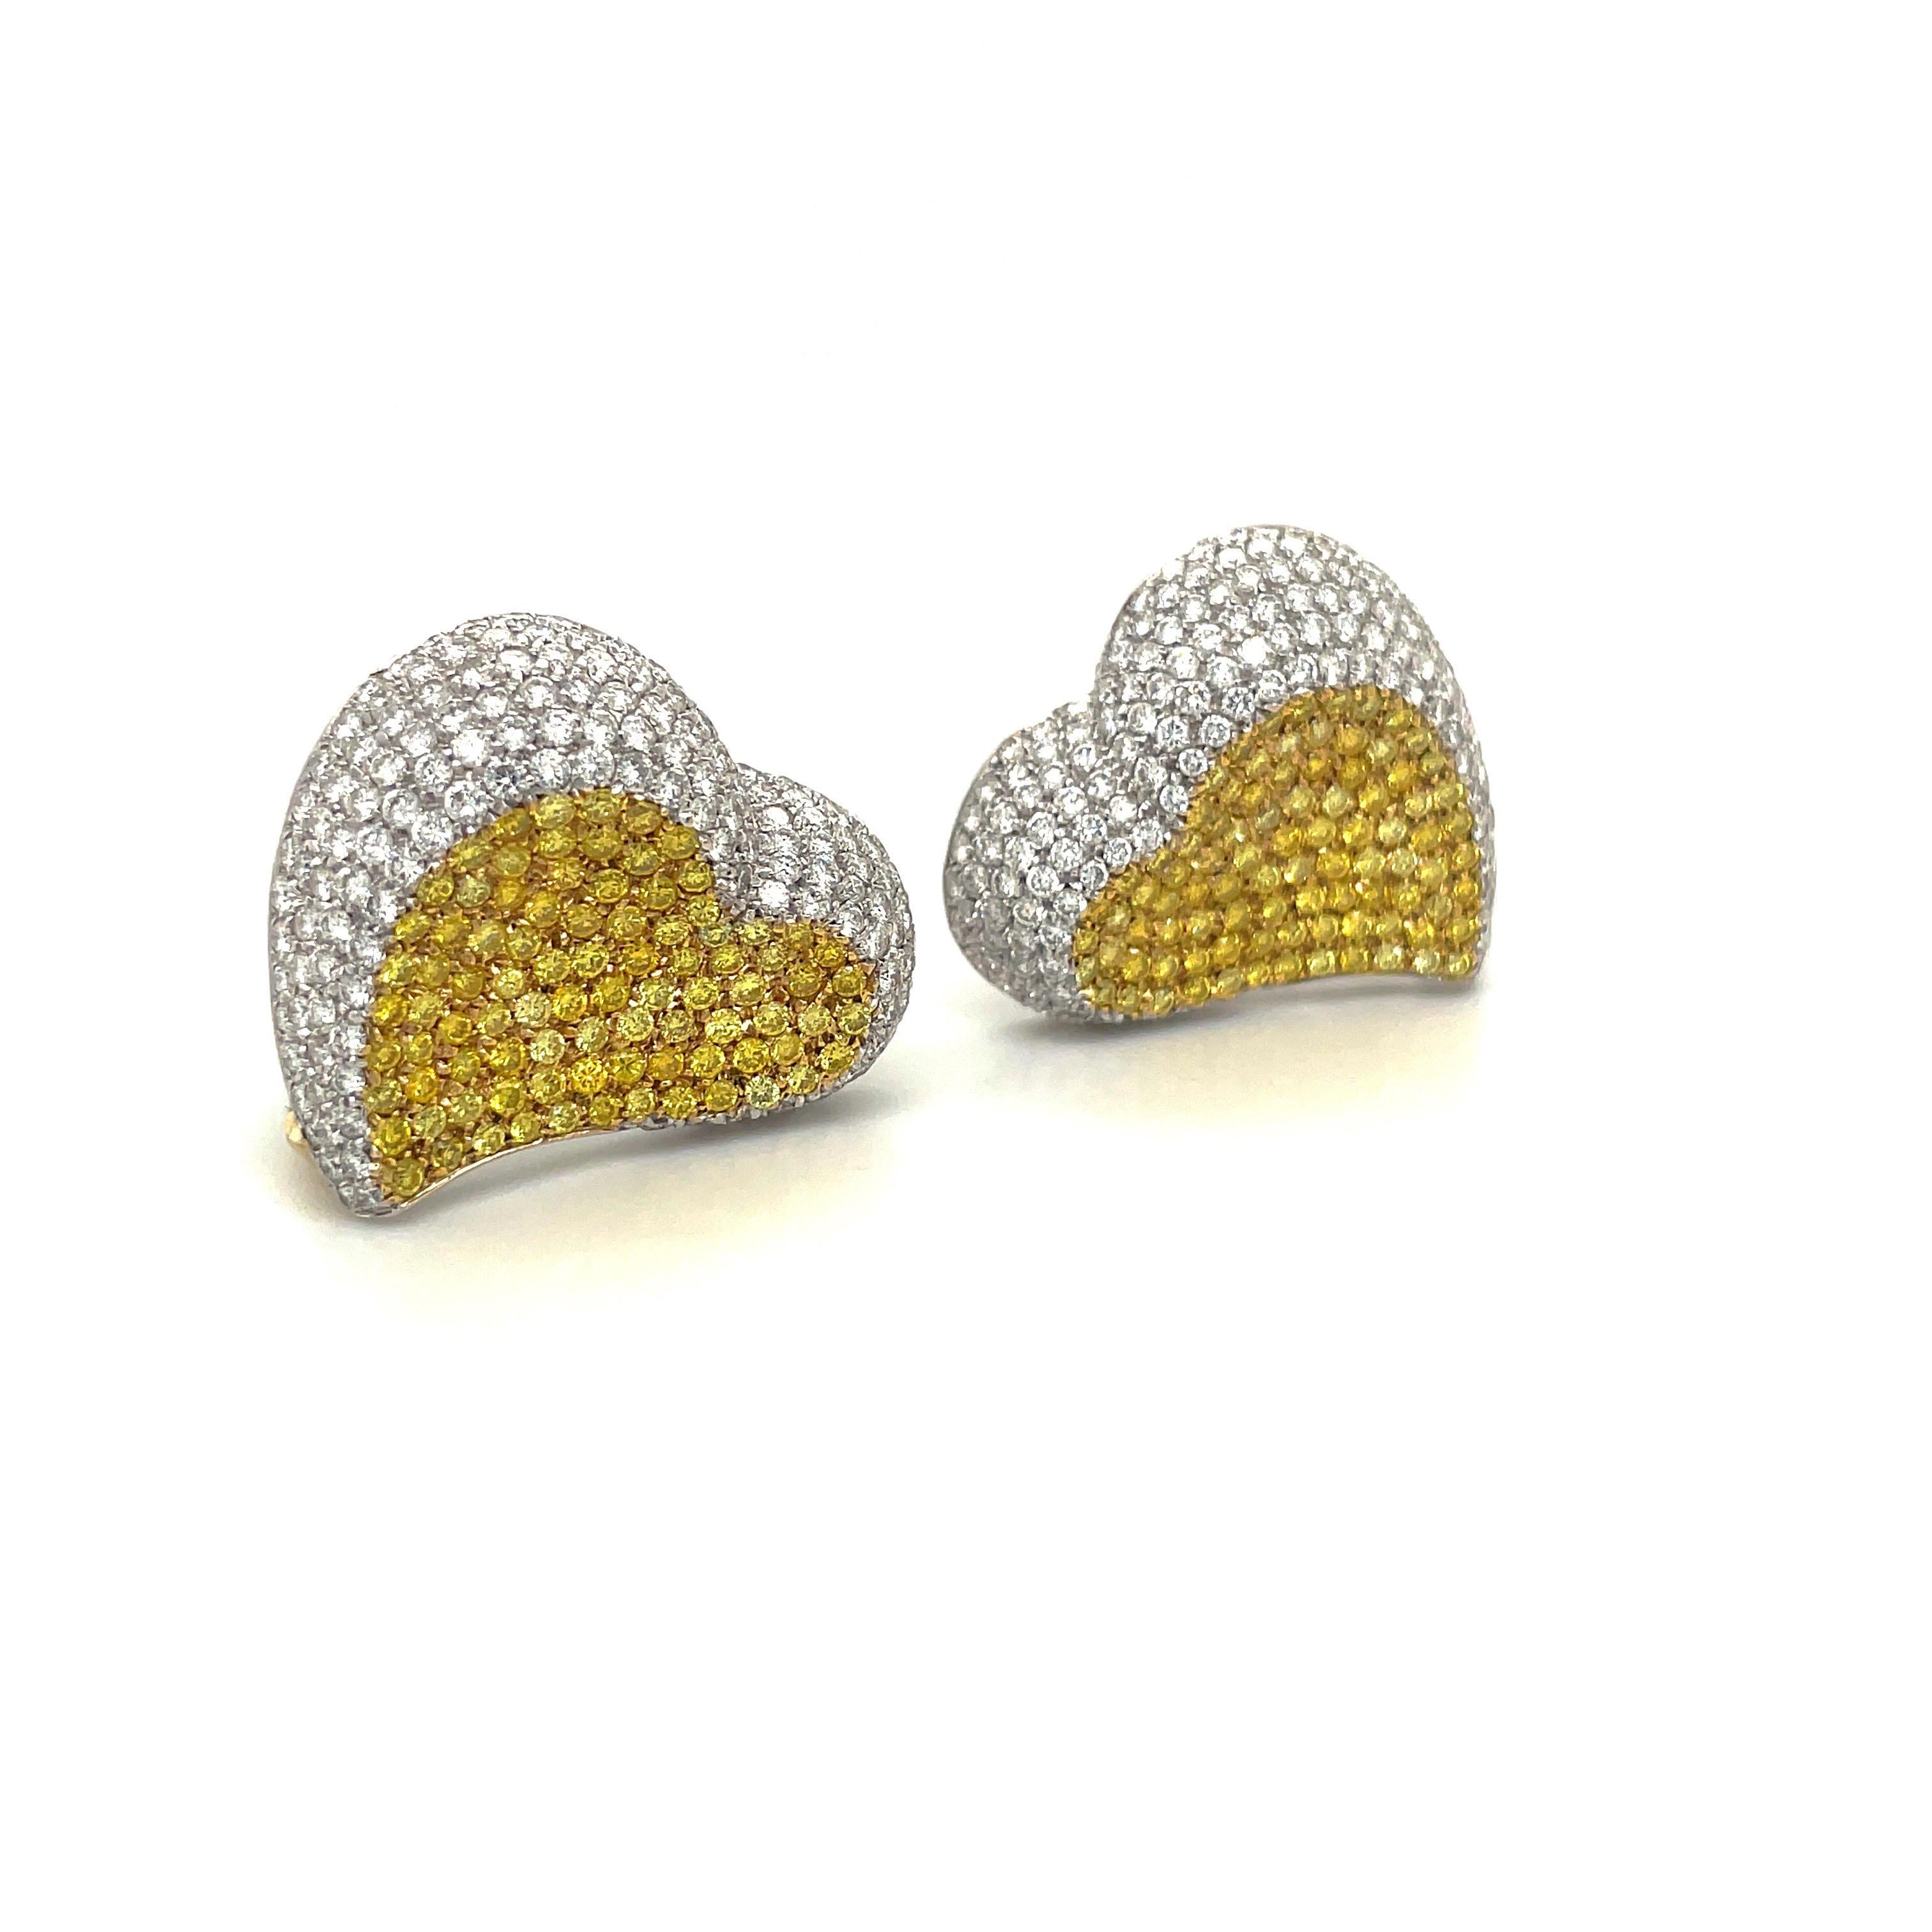 These beautiful large diamond heart earrings are comprised of 3.81cts of brilliant white diamonds, pave set in 18kt white gold, surrounding 2.35cts of fancy intense yellow diamonds pave set in 18kt yellow gold. They measure approximately 1